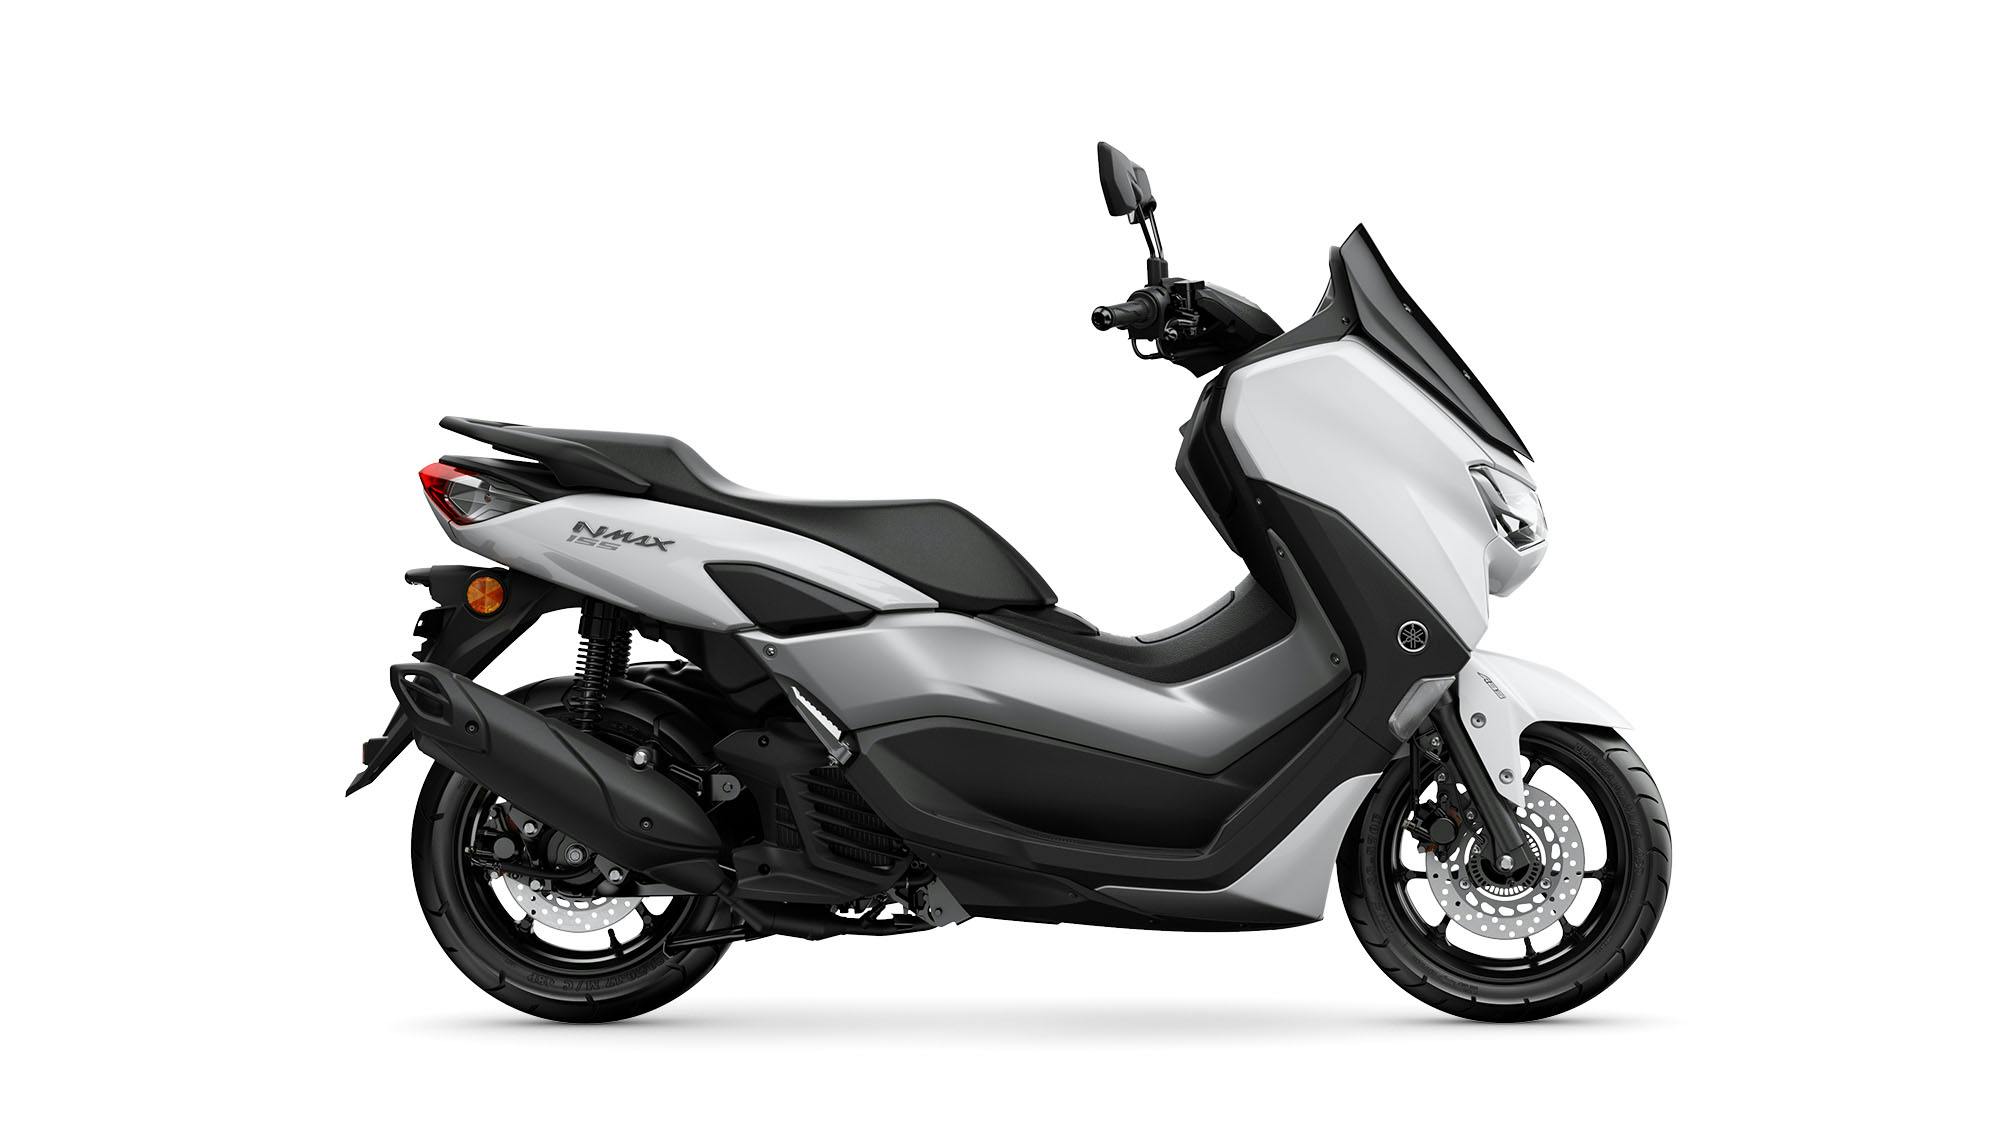 Yamaha NMAX 155 in milky white colour